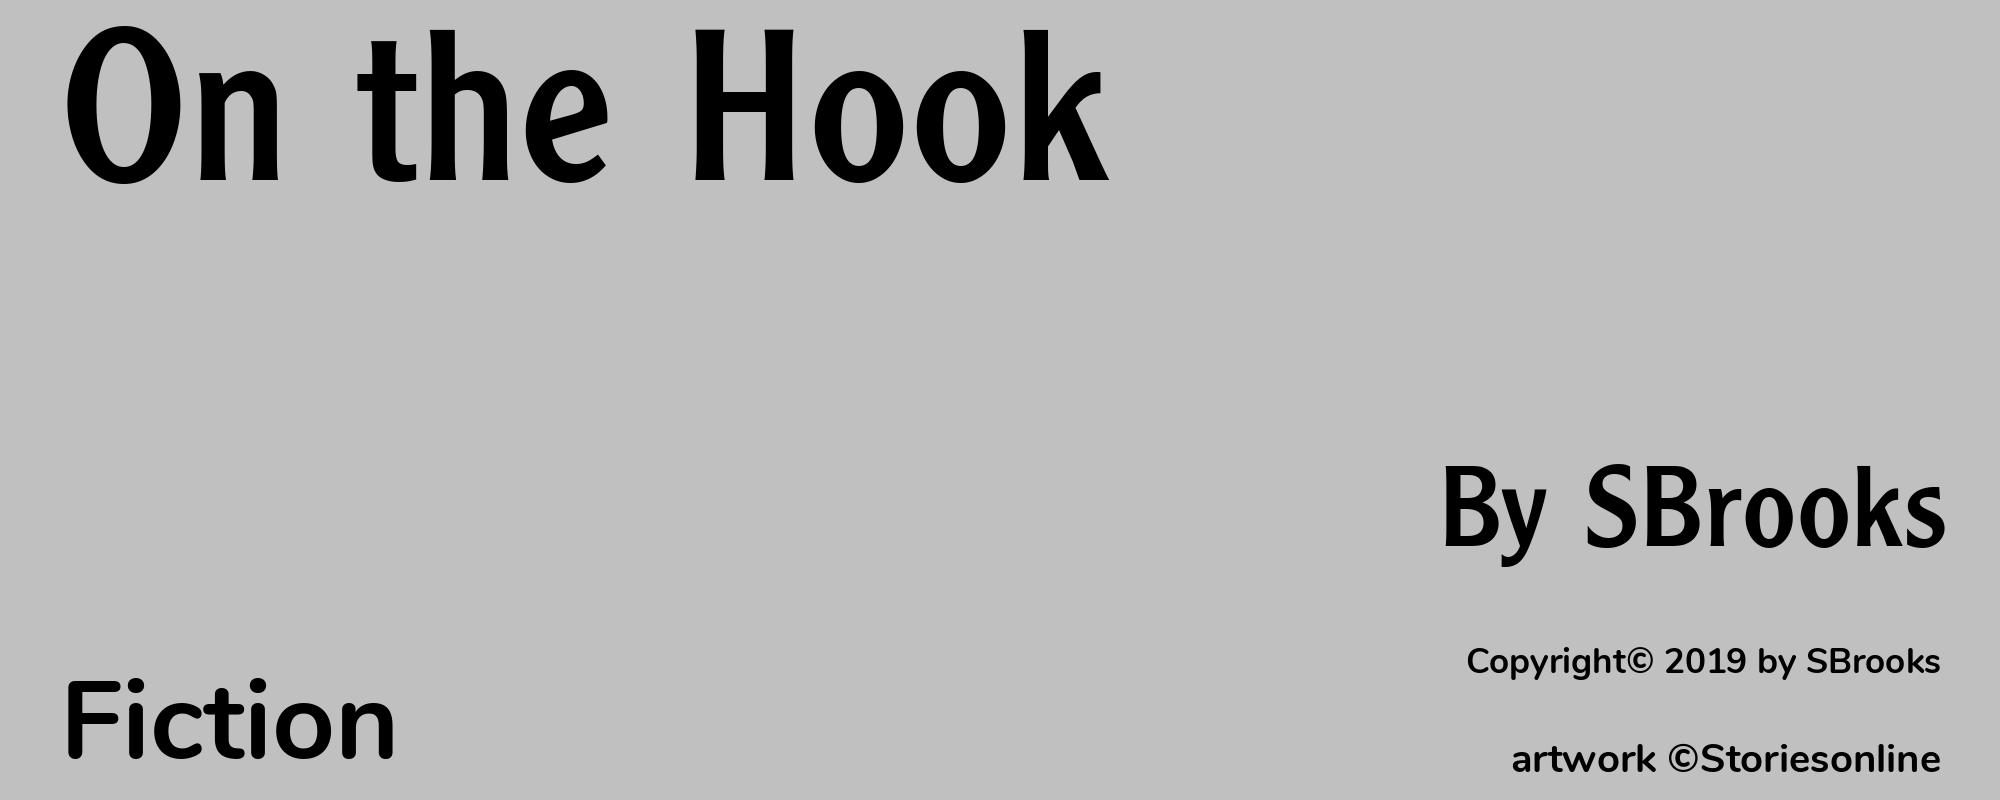 On the Hook - Cover